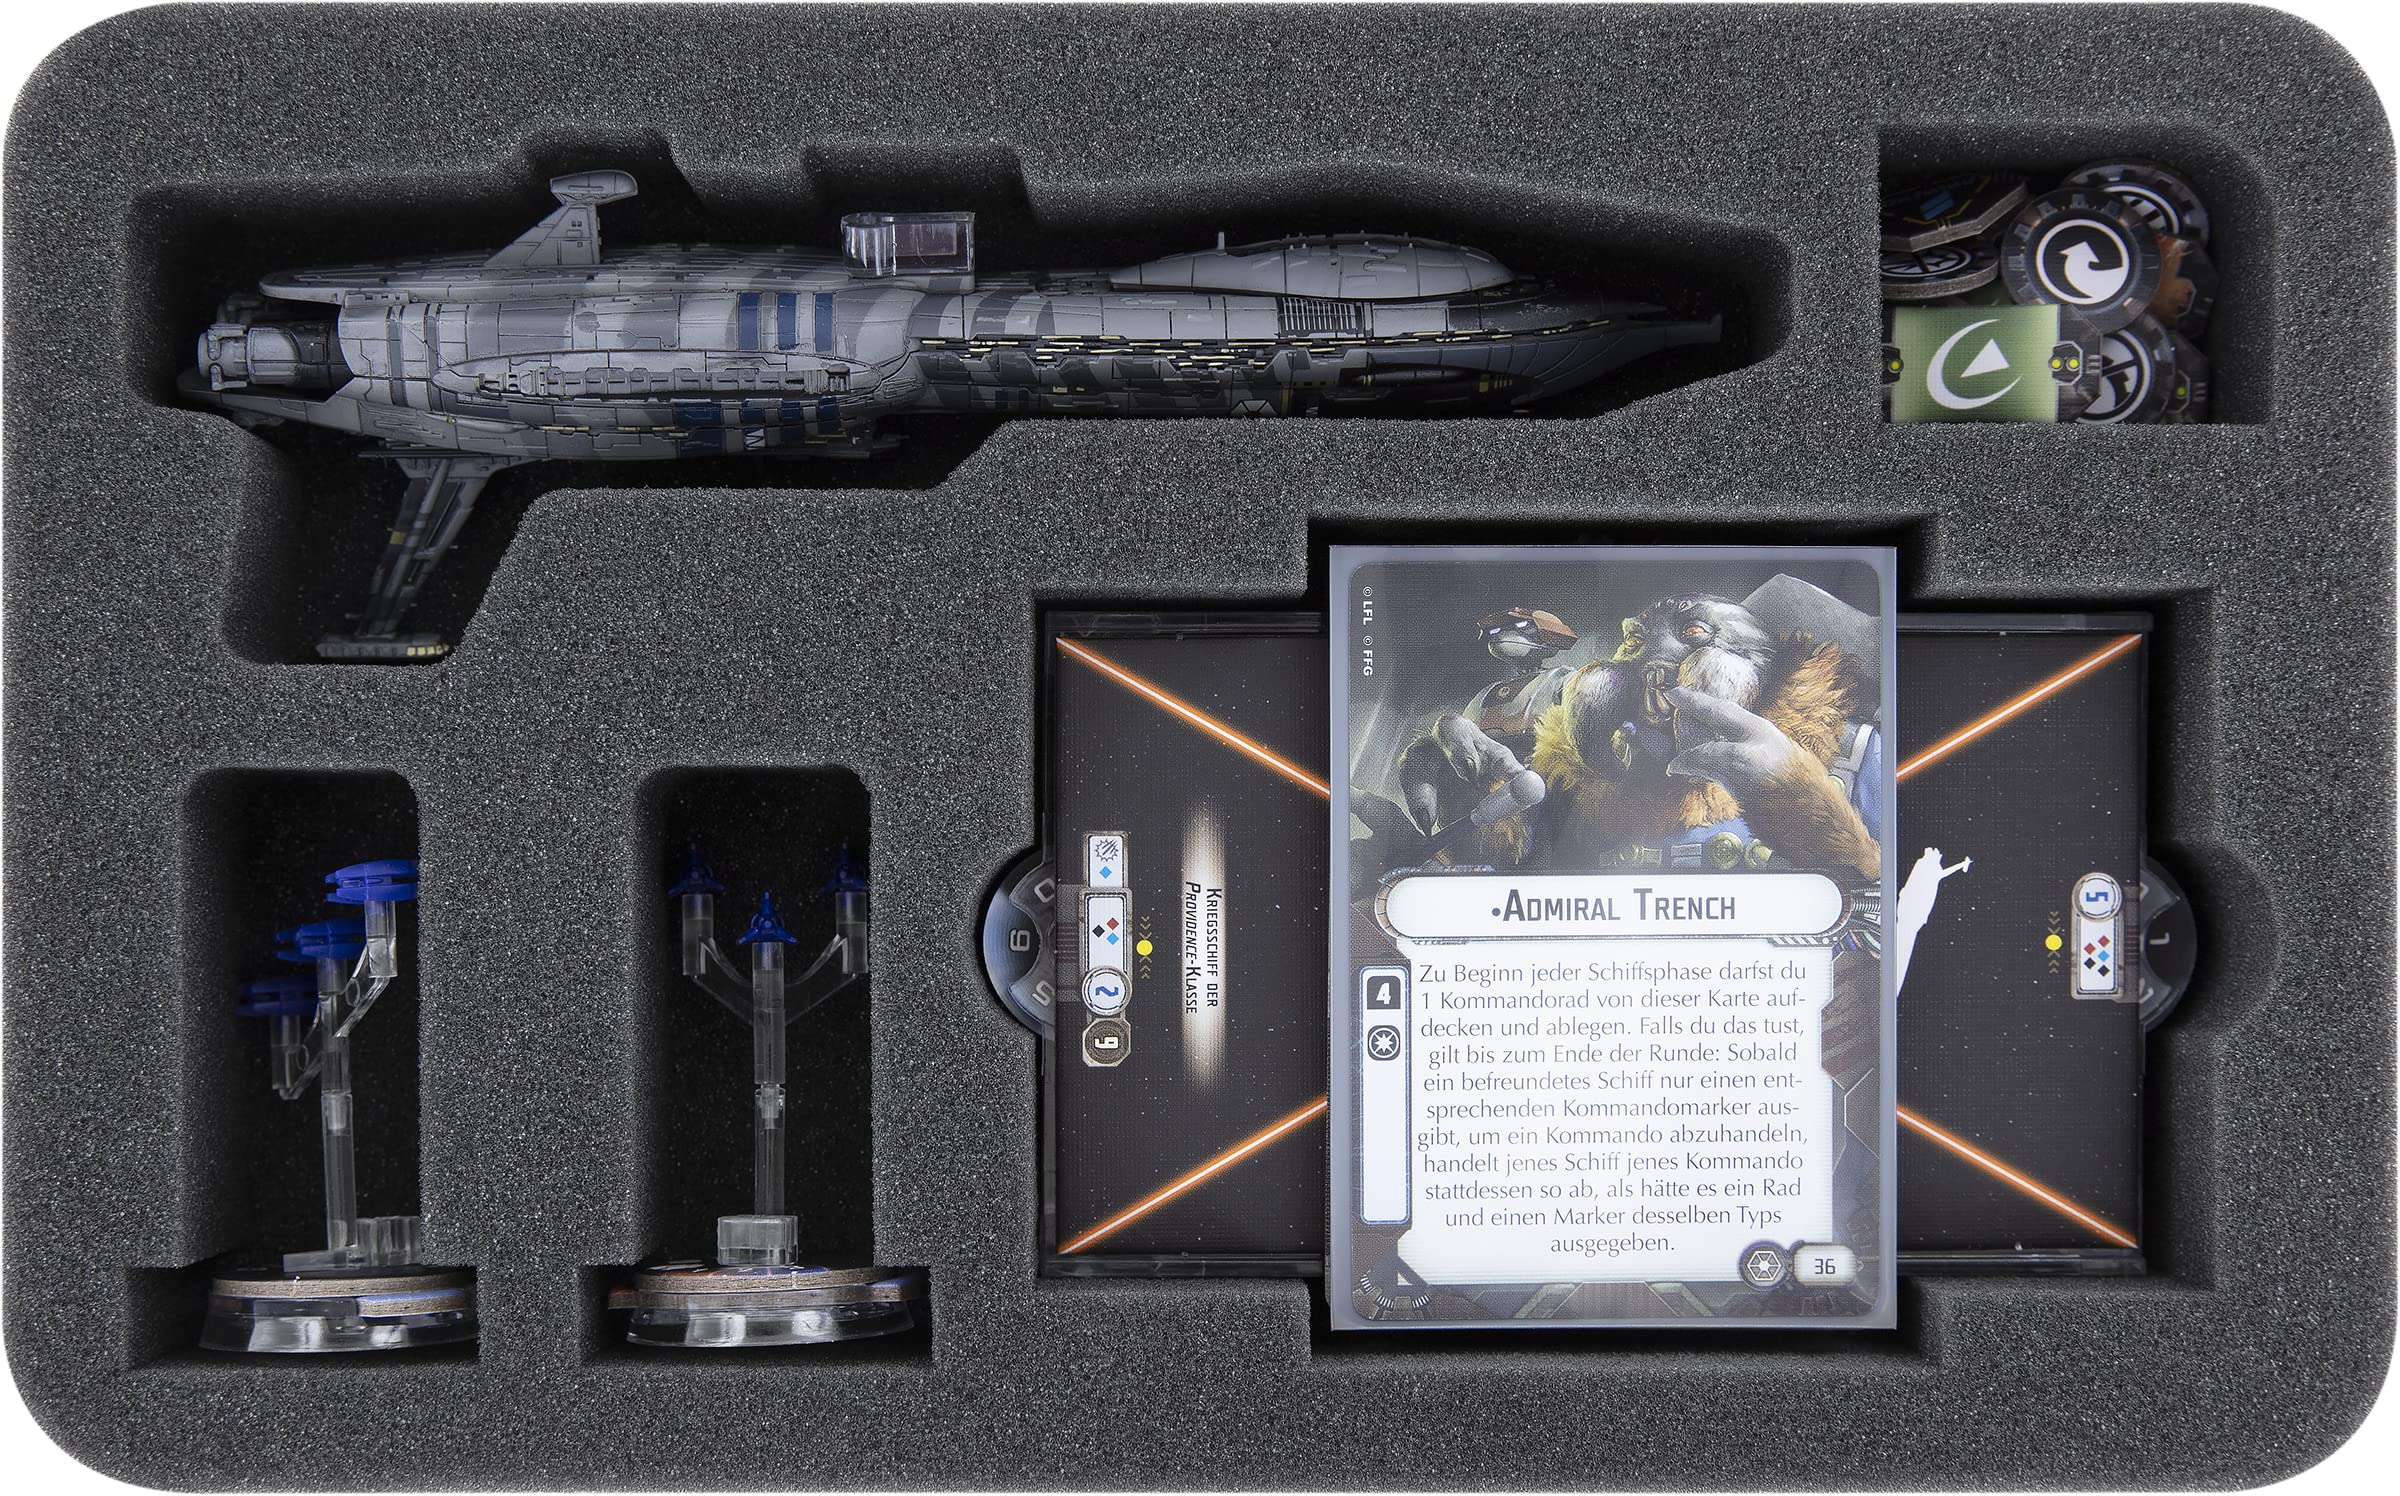 Feldherr Magnetic Box Green Compatible with Star Wars Armada: Invisible Hand